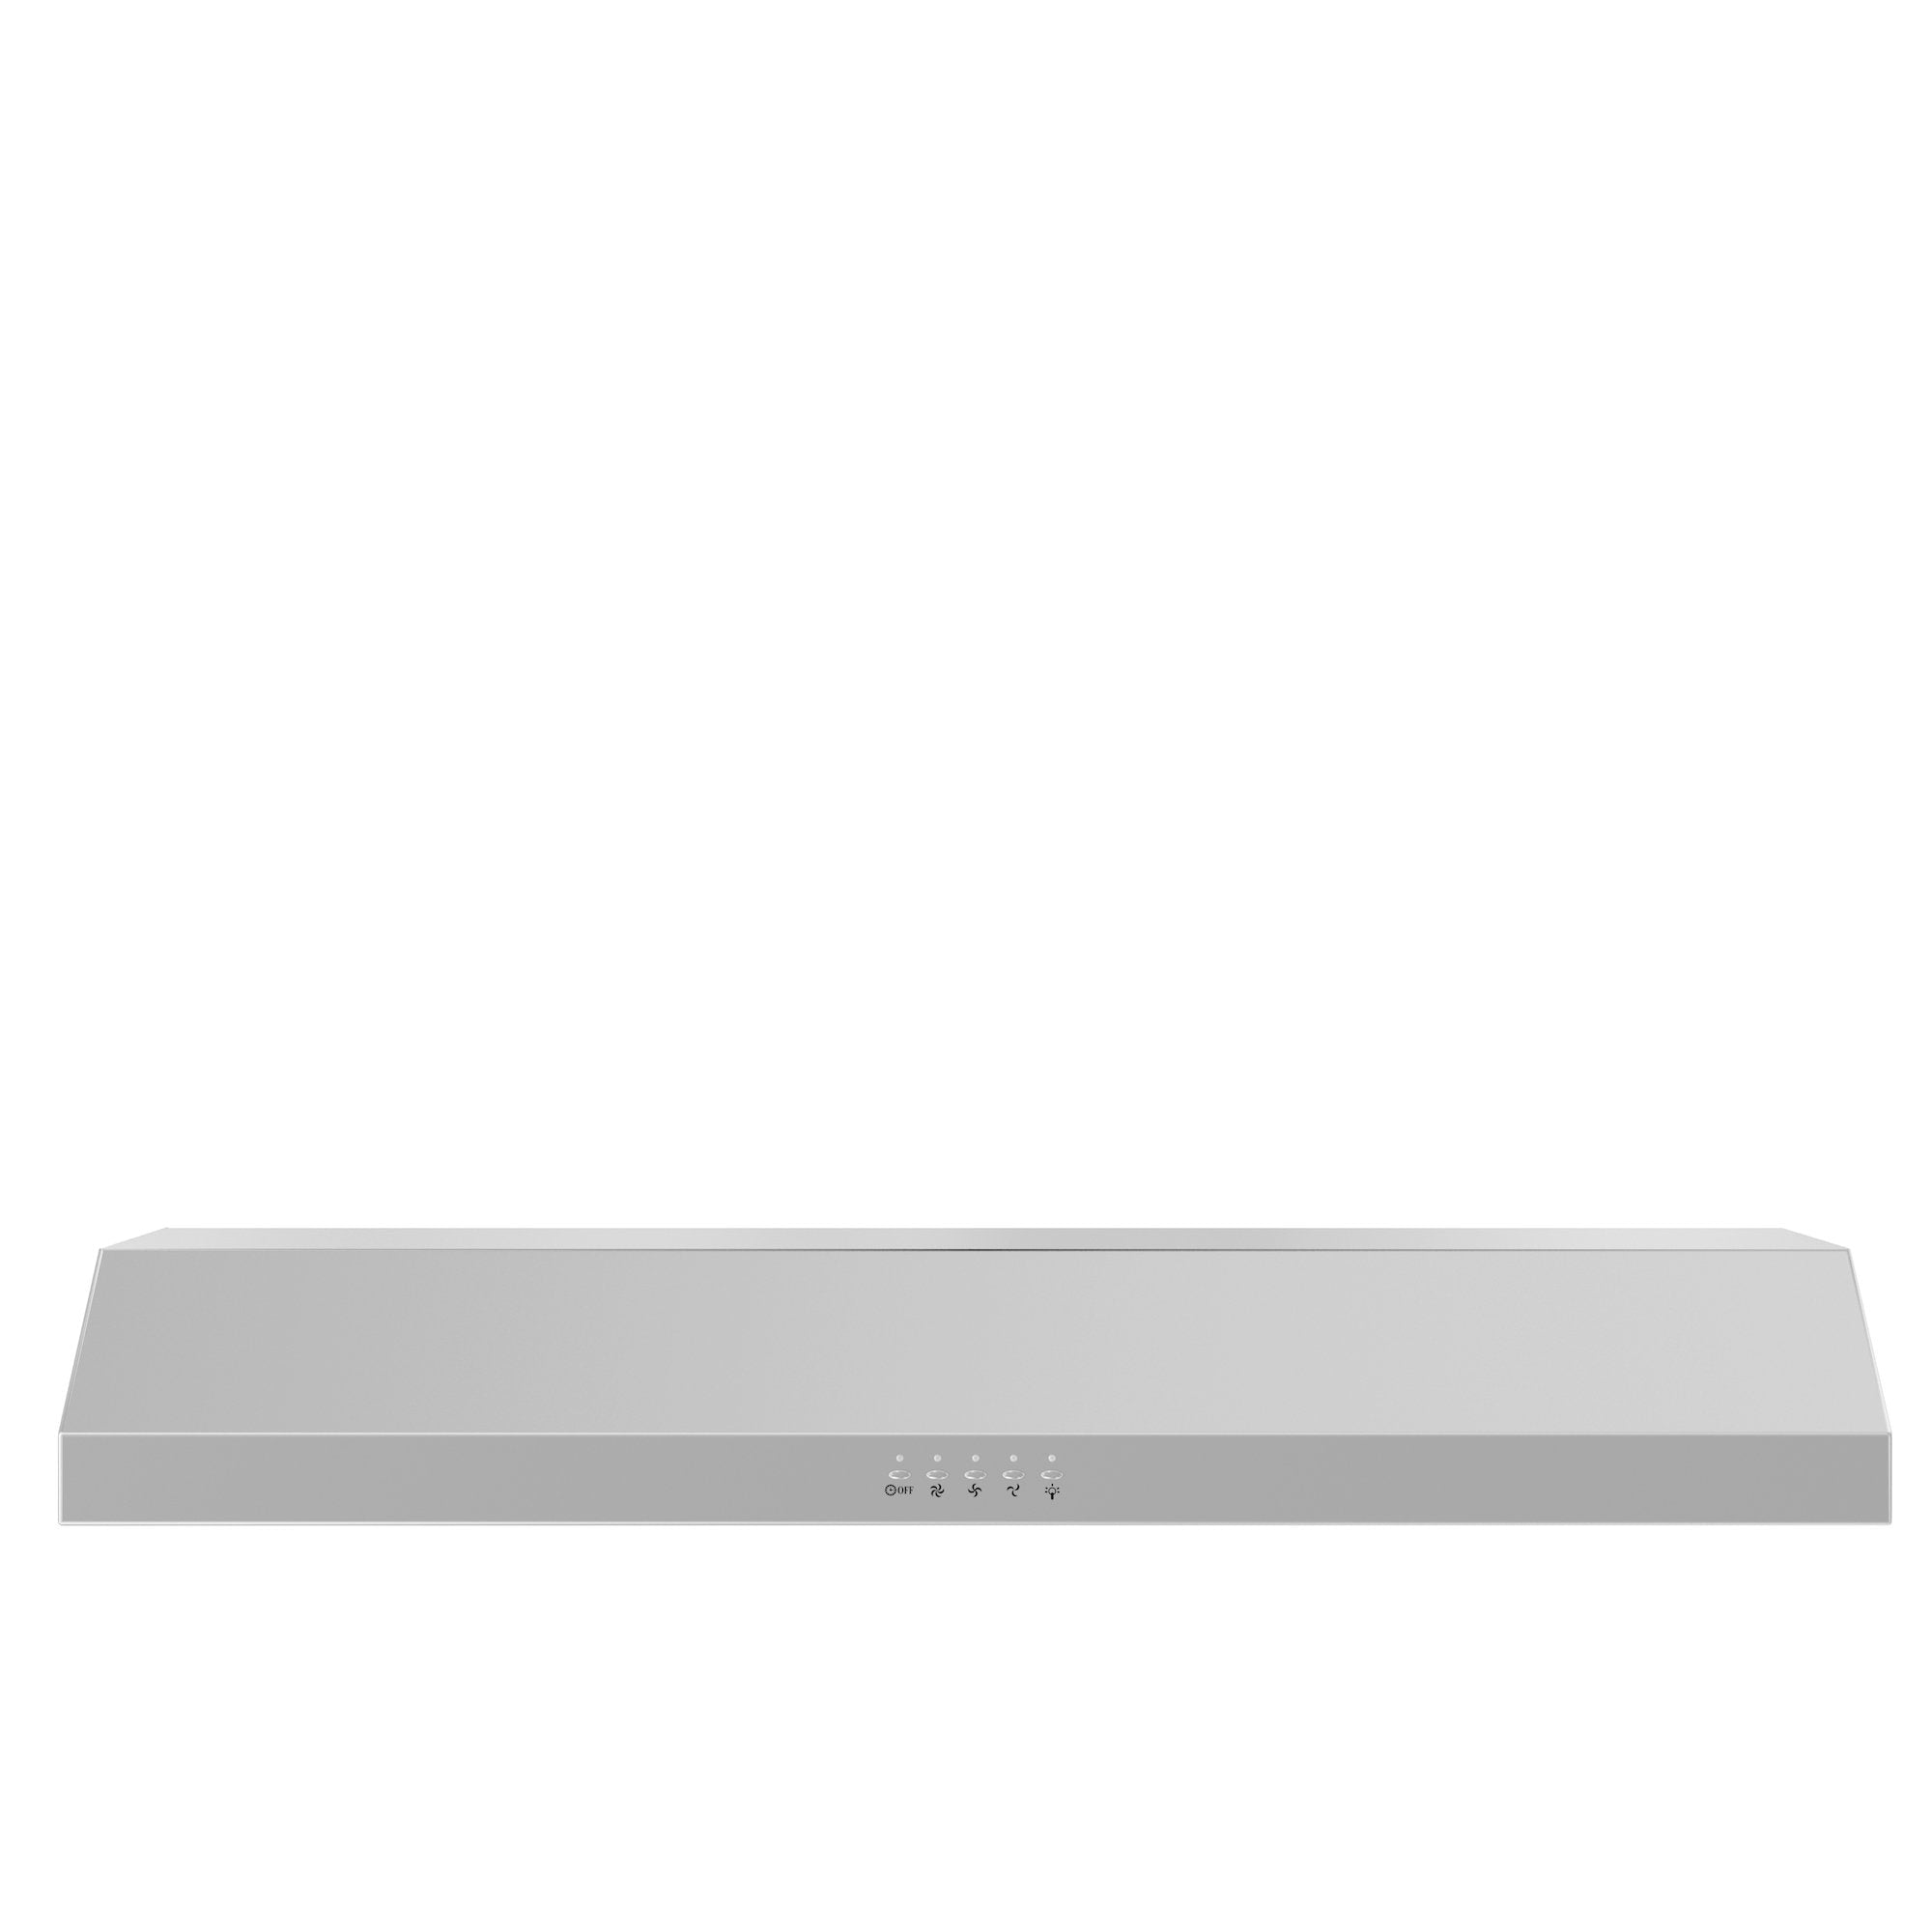 ZLINE 30 inch 280 CFM Ducted Under Cabinet Range Hood in Stainless Steel - Hardwired Power (615-30) front.